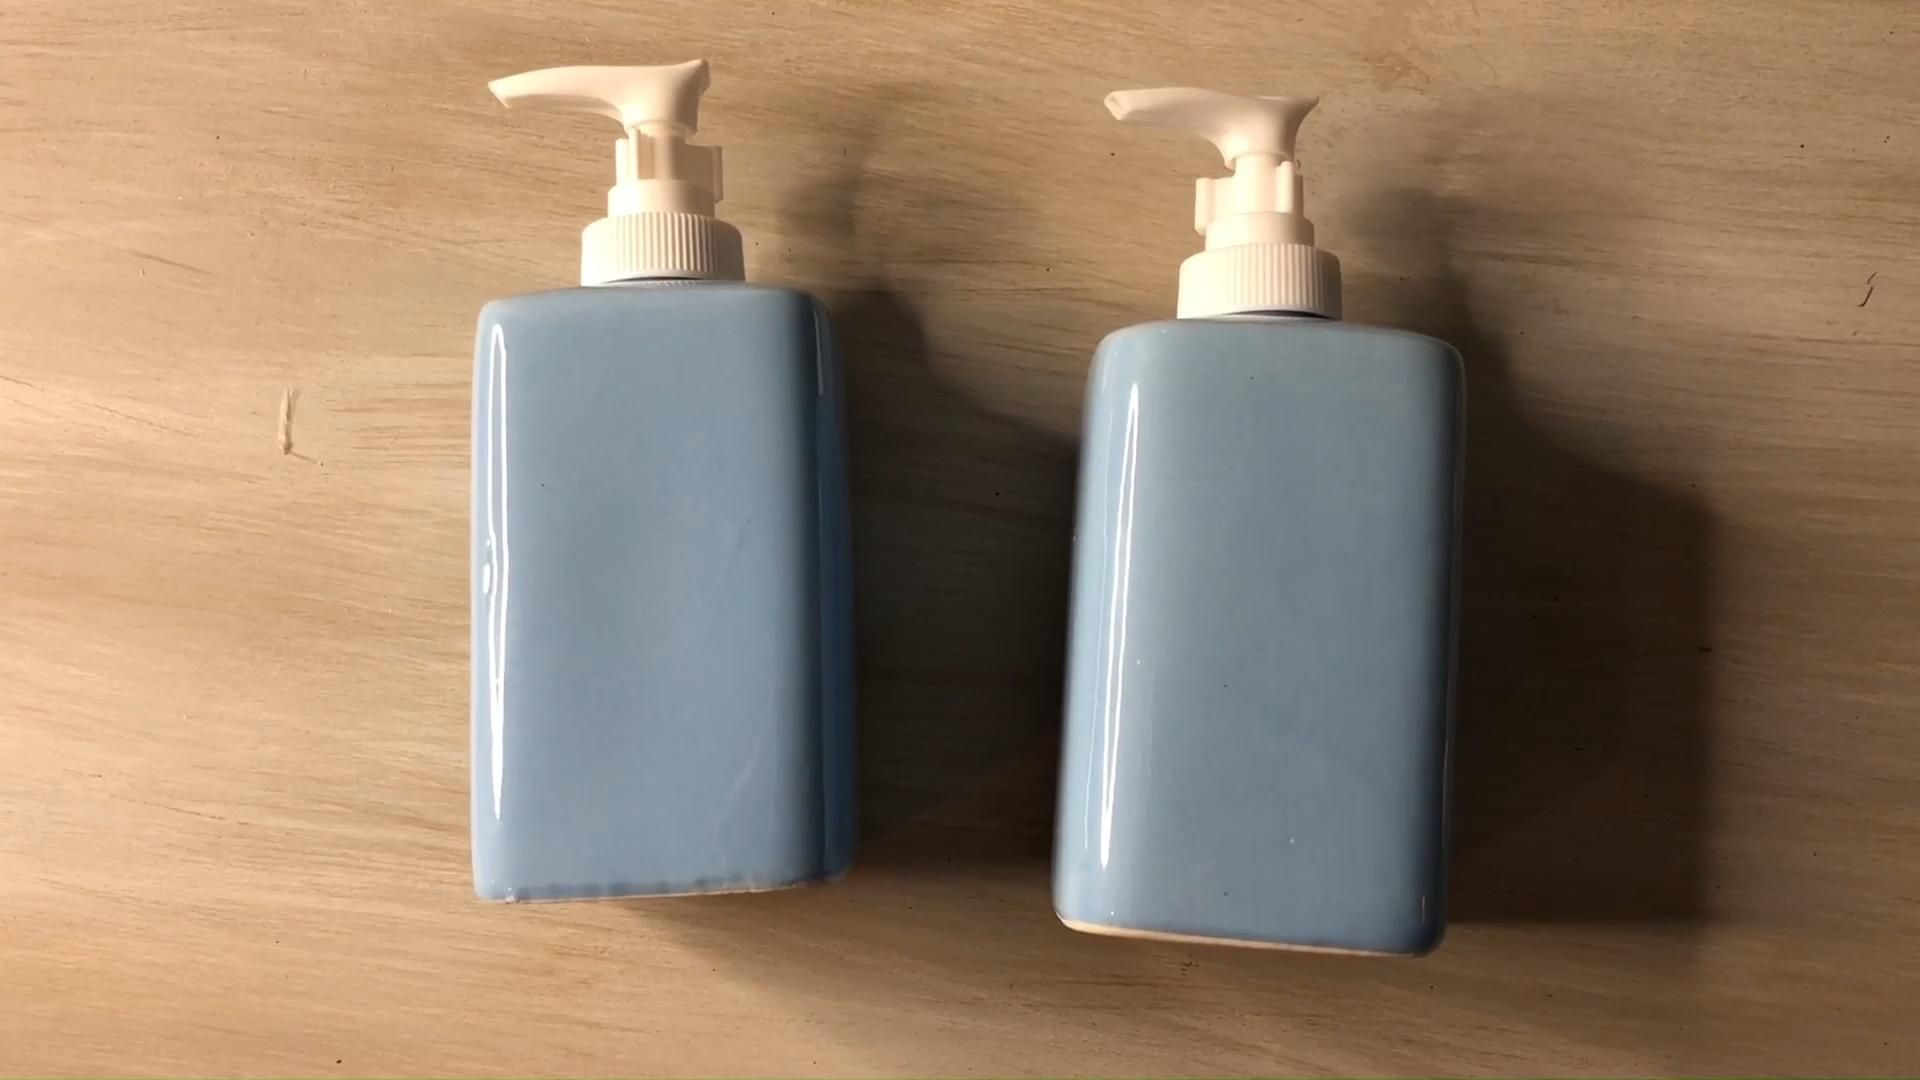 How To Upcycle Soap Dispensers - How To Upcycle Soap Dispensers -   17 diy Home Decor dollar store ideas